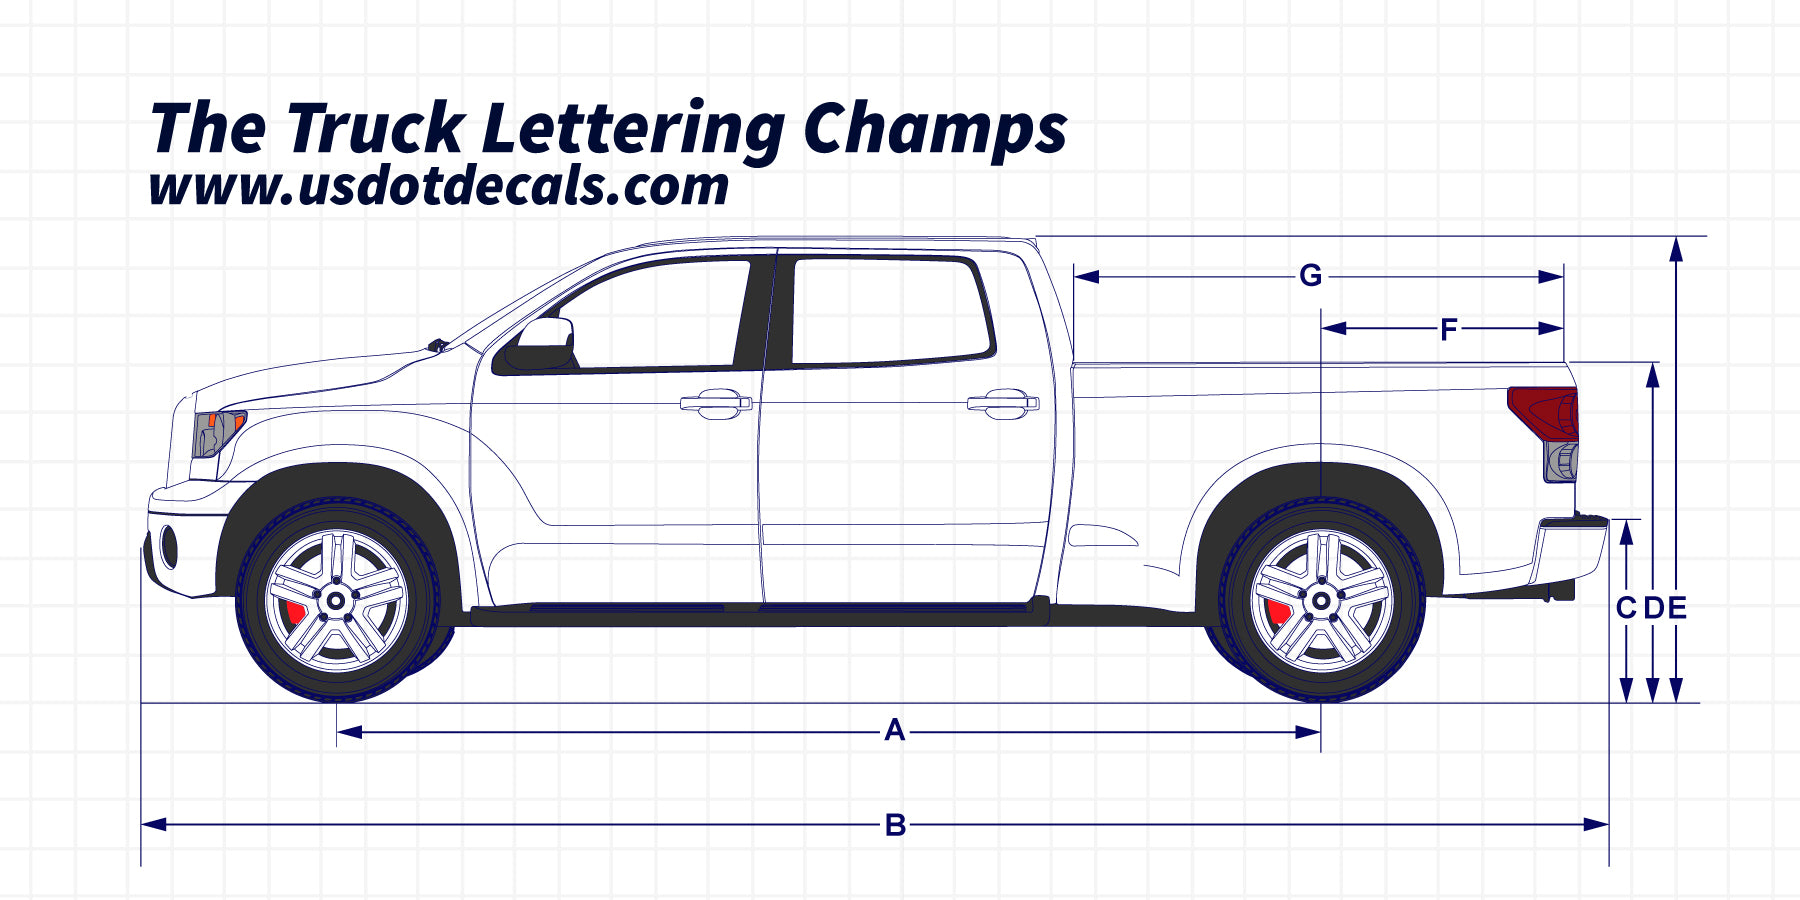 the truck lettering champs usdot decals